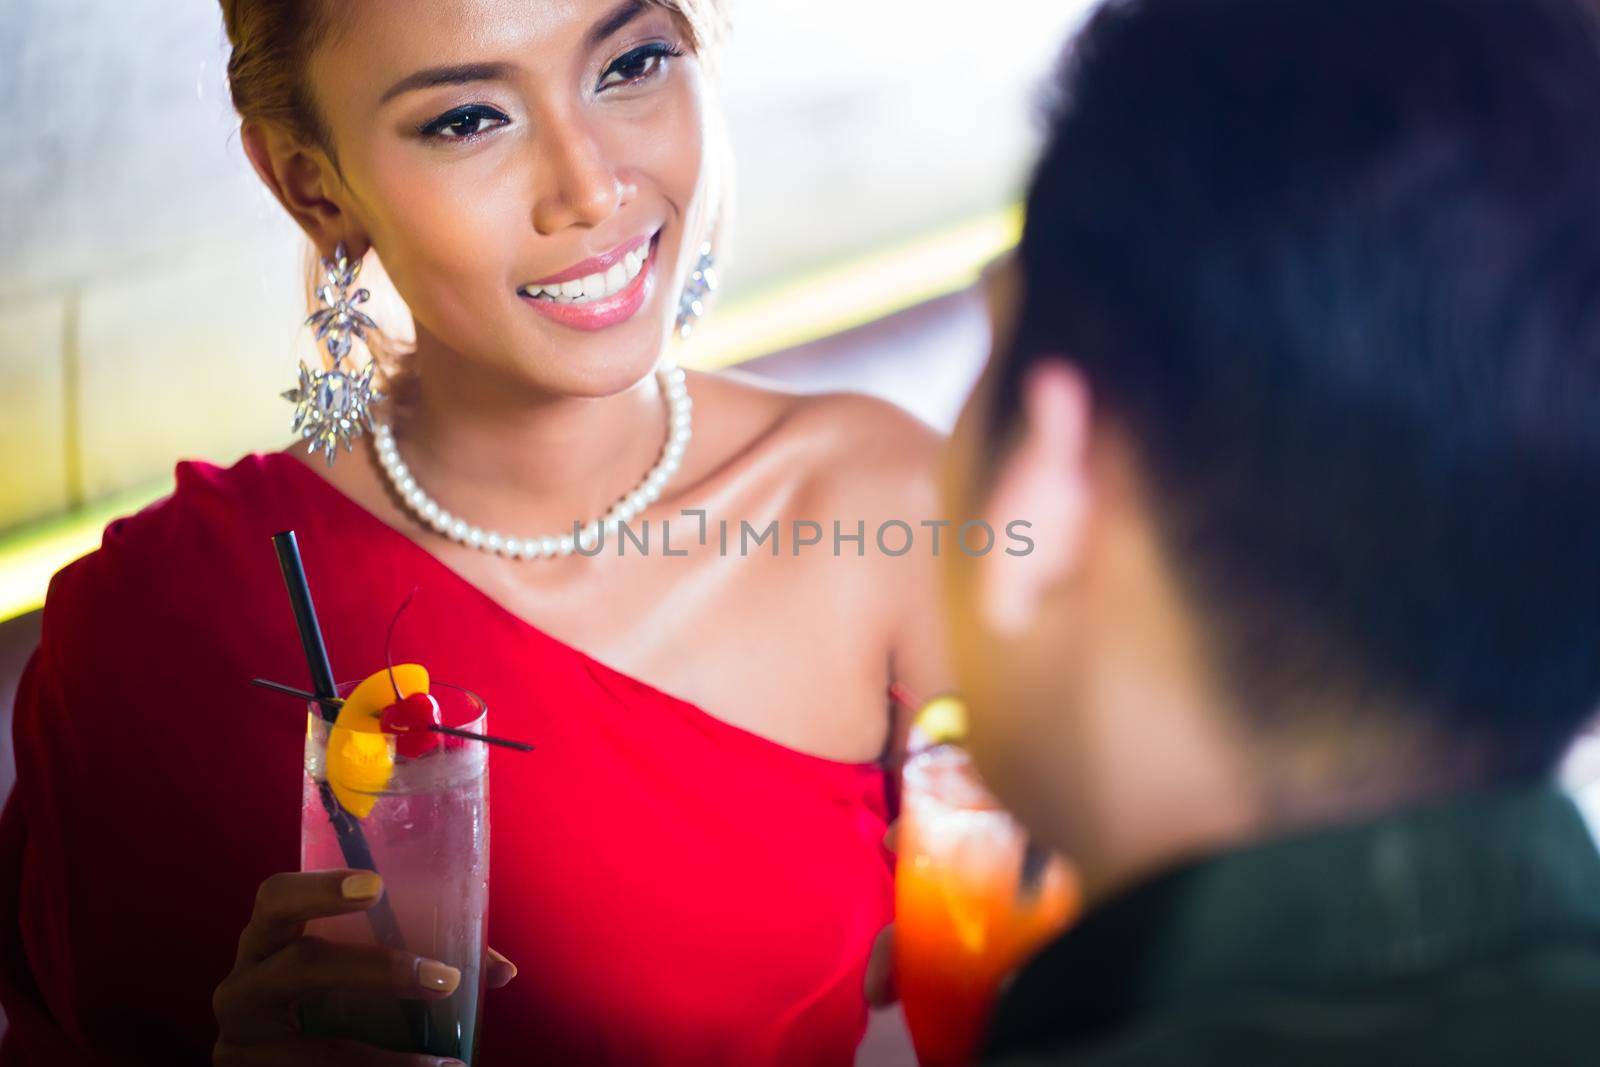 Asian couple drinking cocktails in fancy bar